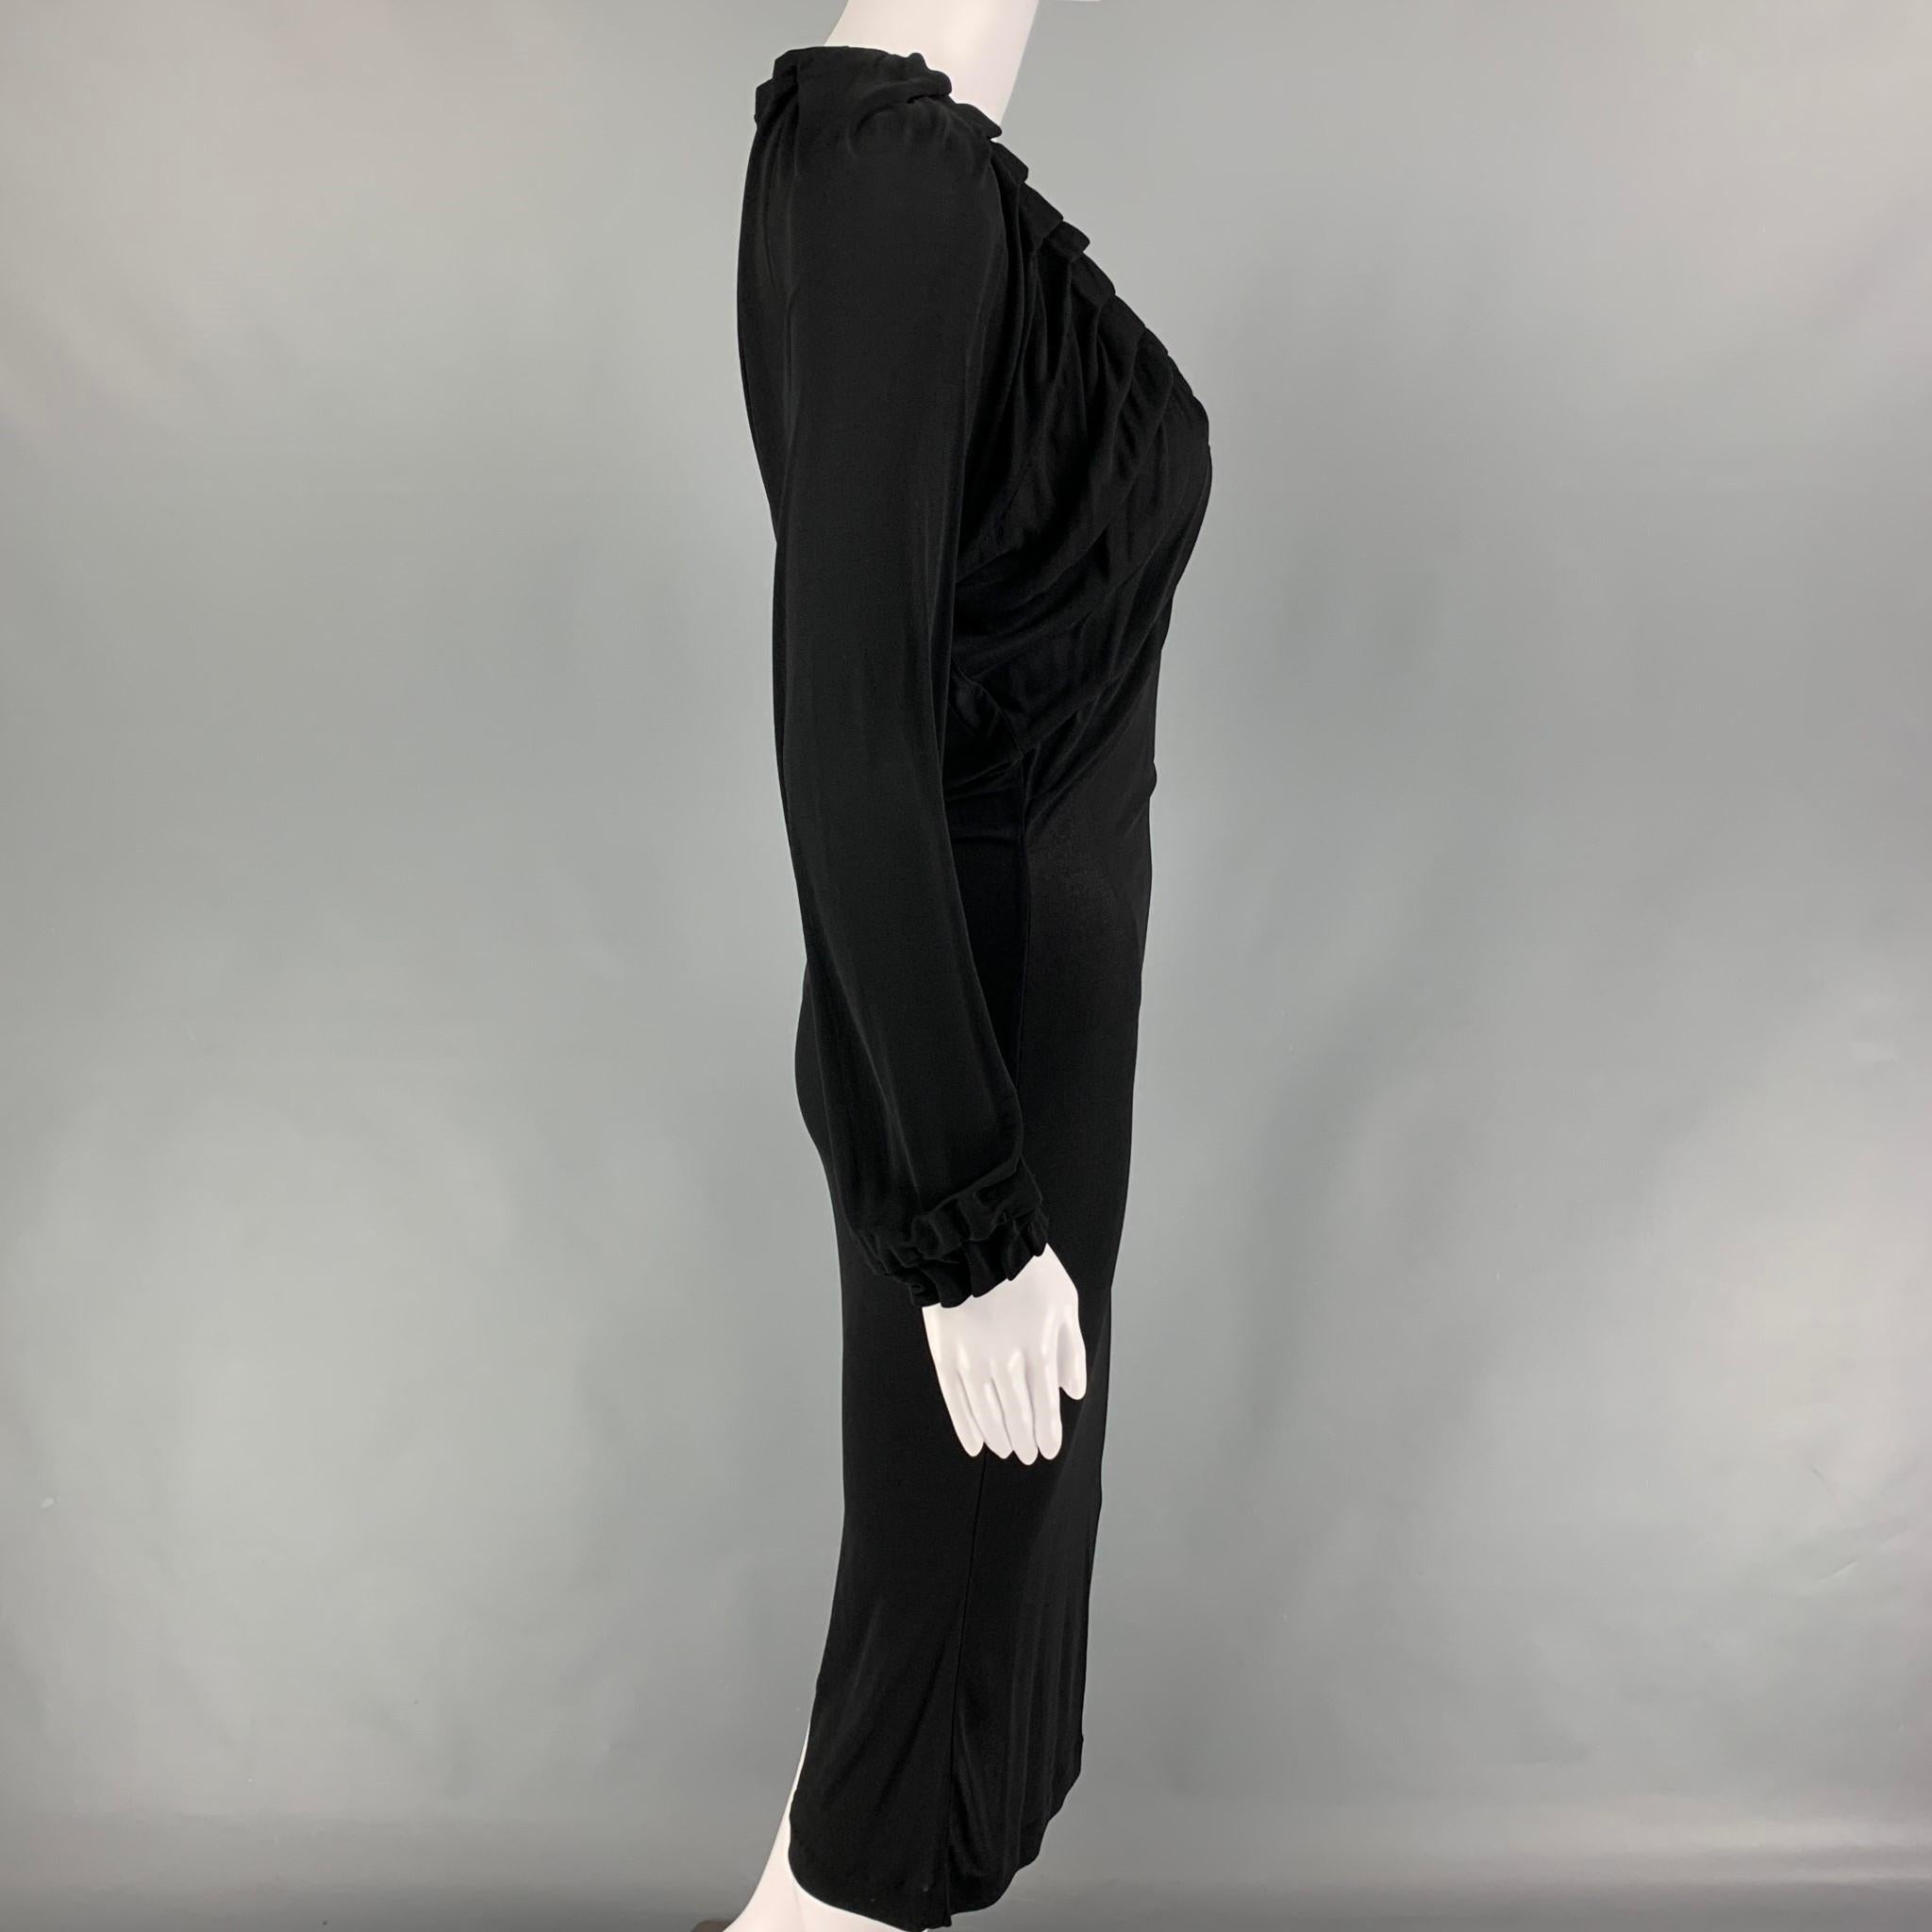 YVES SAINT LAURENT dress comes in a black stretch viscose featuring a pleated style, long sleeves, and a v-neck. Made in Italy. 

Very Good Pre-Owned Condition.
Marked: S

Measurements:

Shoulder: 14 in.
Bust: 28 in.
Waist: 22 in.
Hip: 30